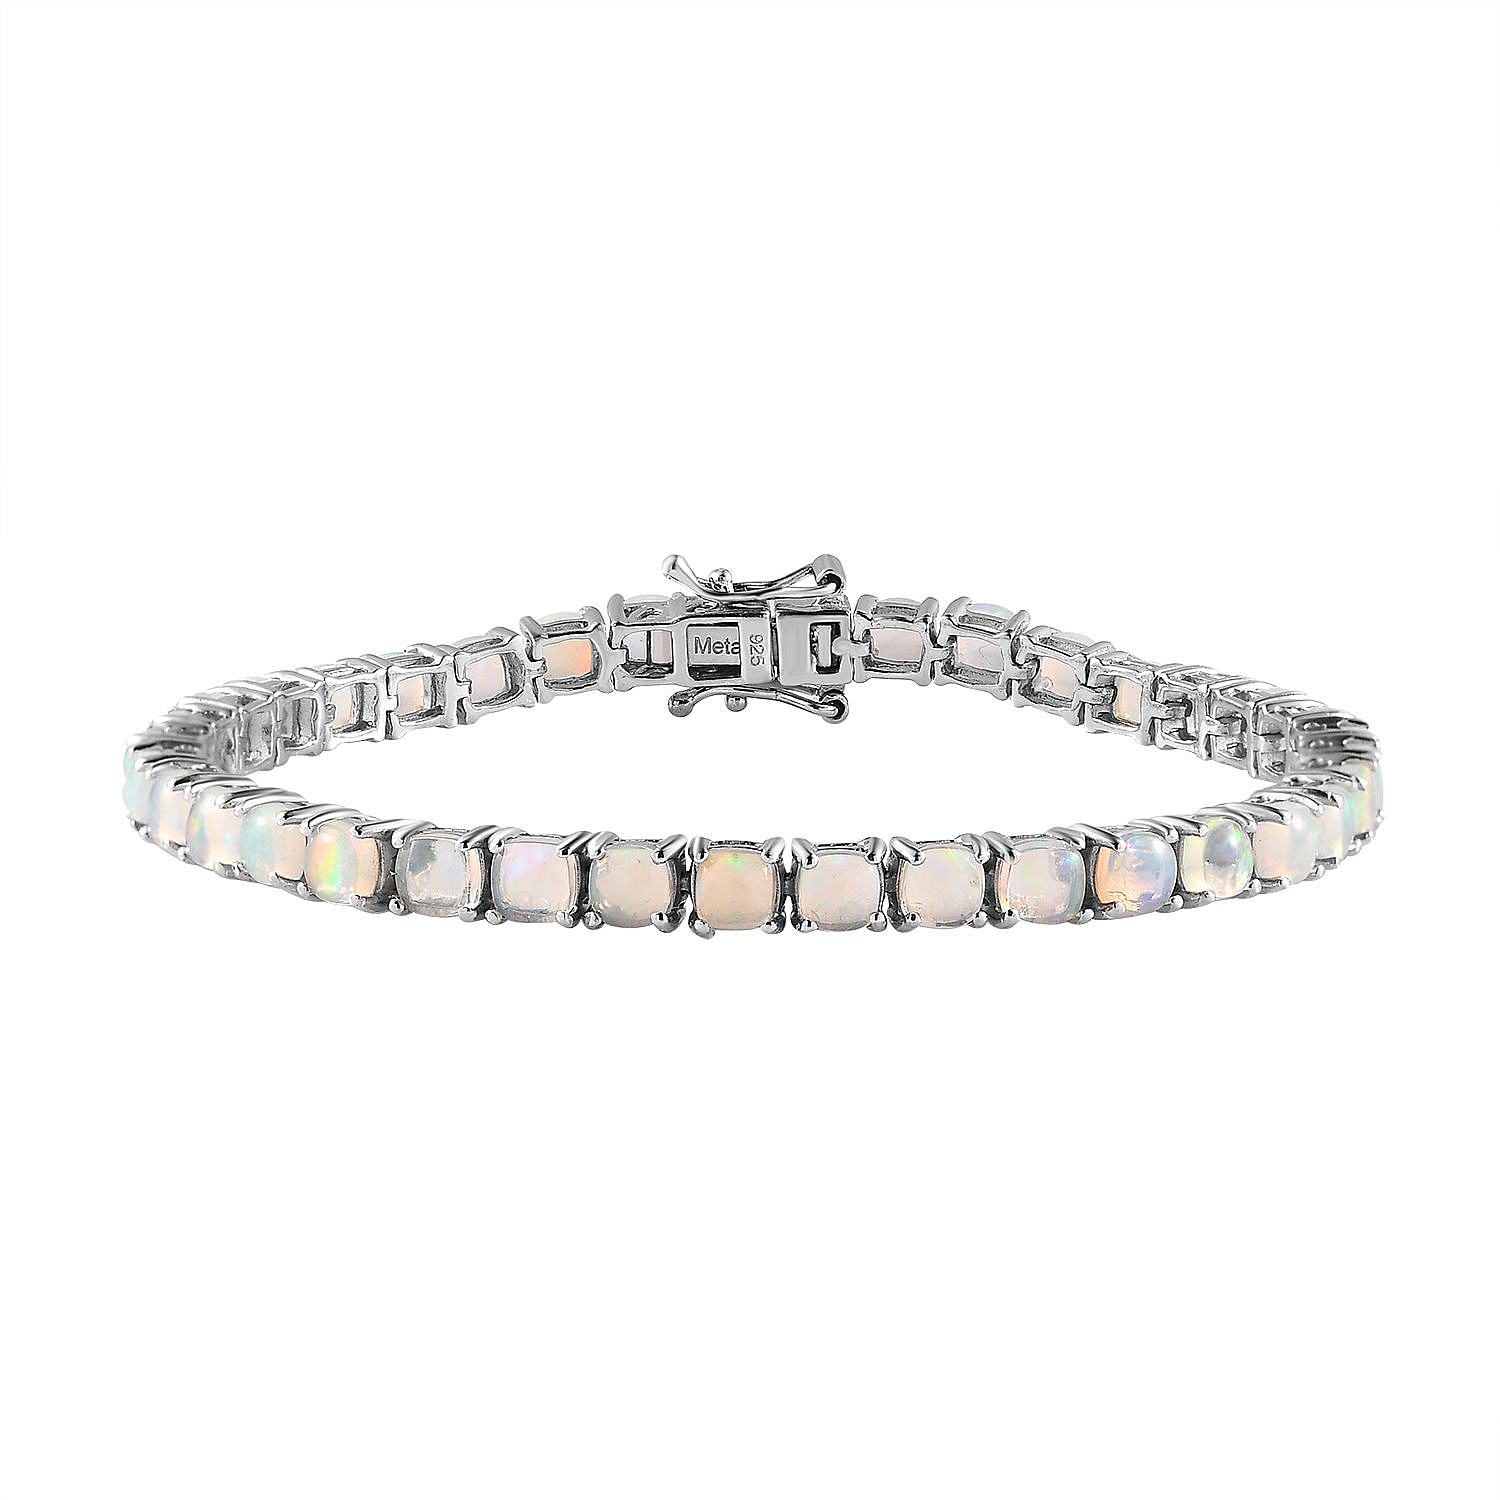 Ethiopian Welo Opal Tennis Bracelet (Size - 7) in Platinum Overlay Sterling Silver 8.43 Ct, Silver Wt. 11.32 Gms